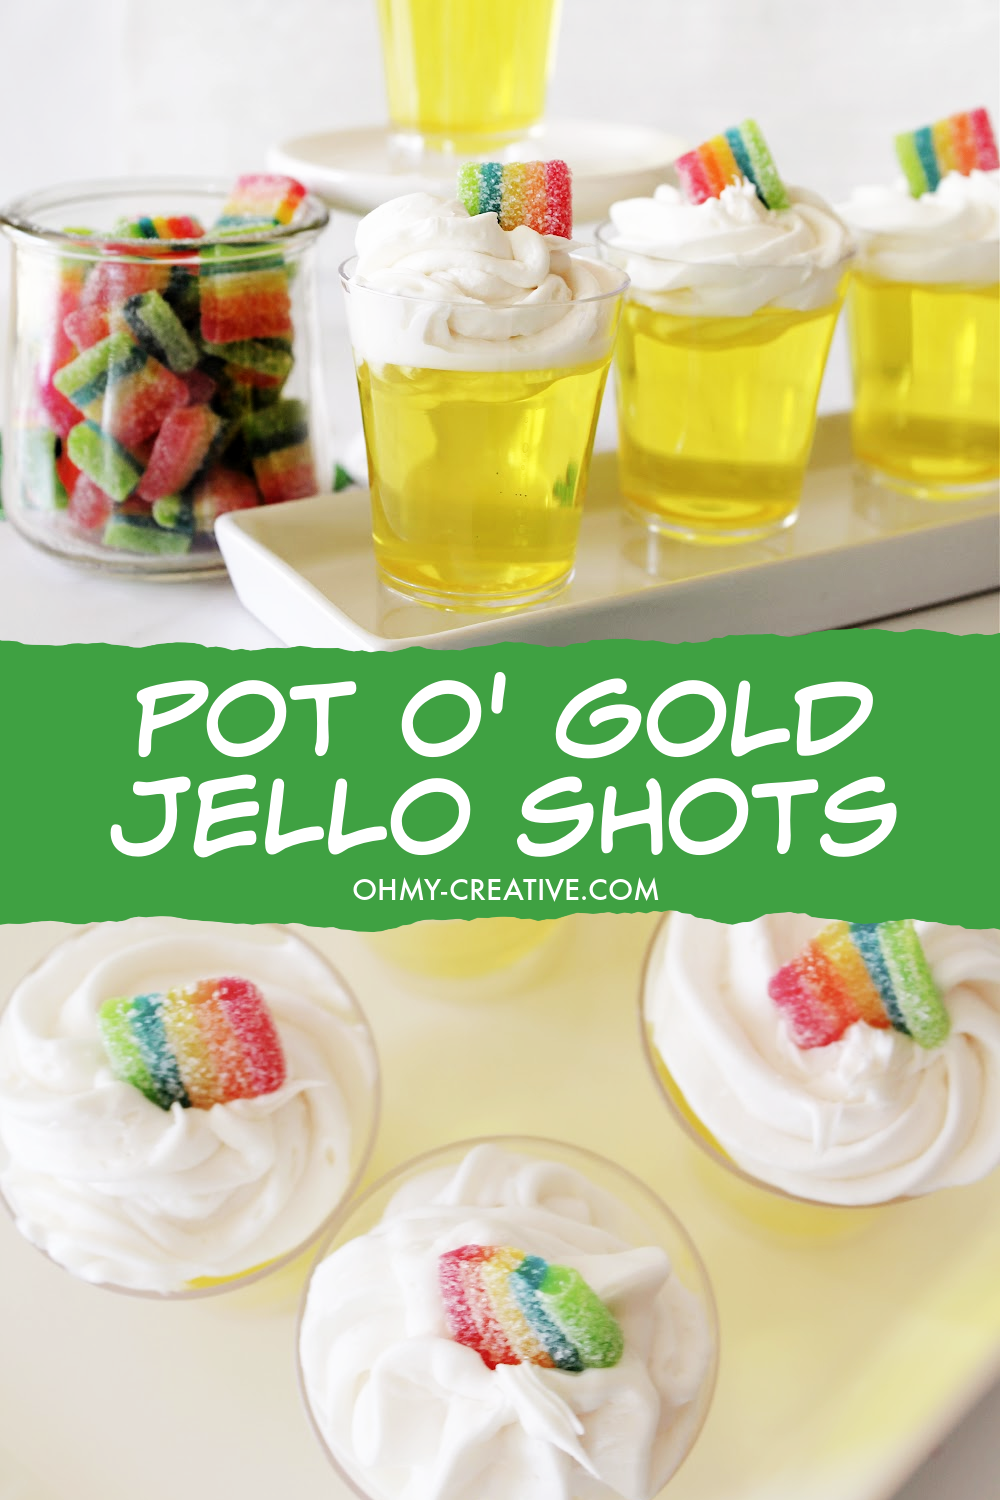 Pin image with Pot o' gold jello shots sitting on a white tray. Jar of rainbow candy sitting in the background.